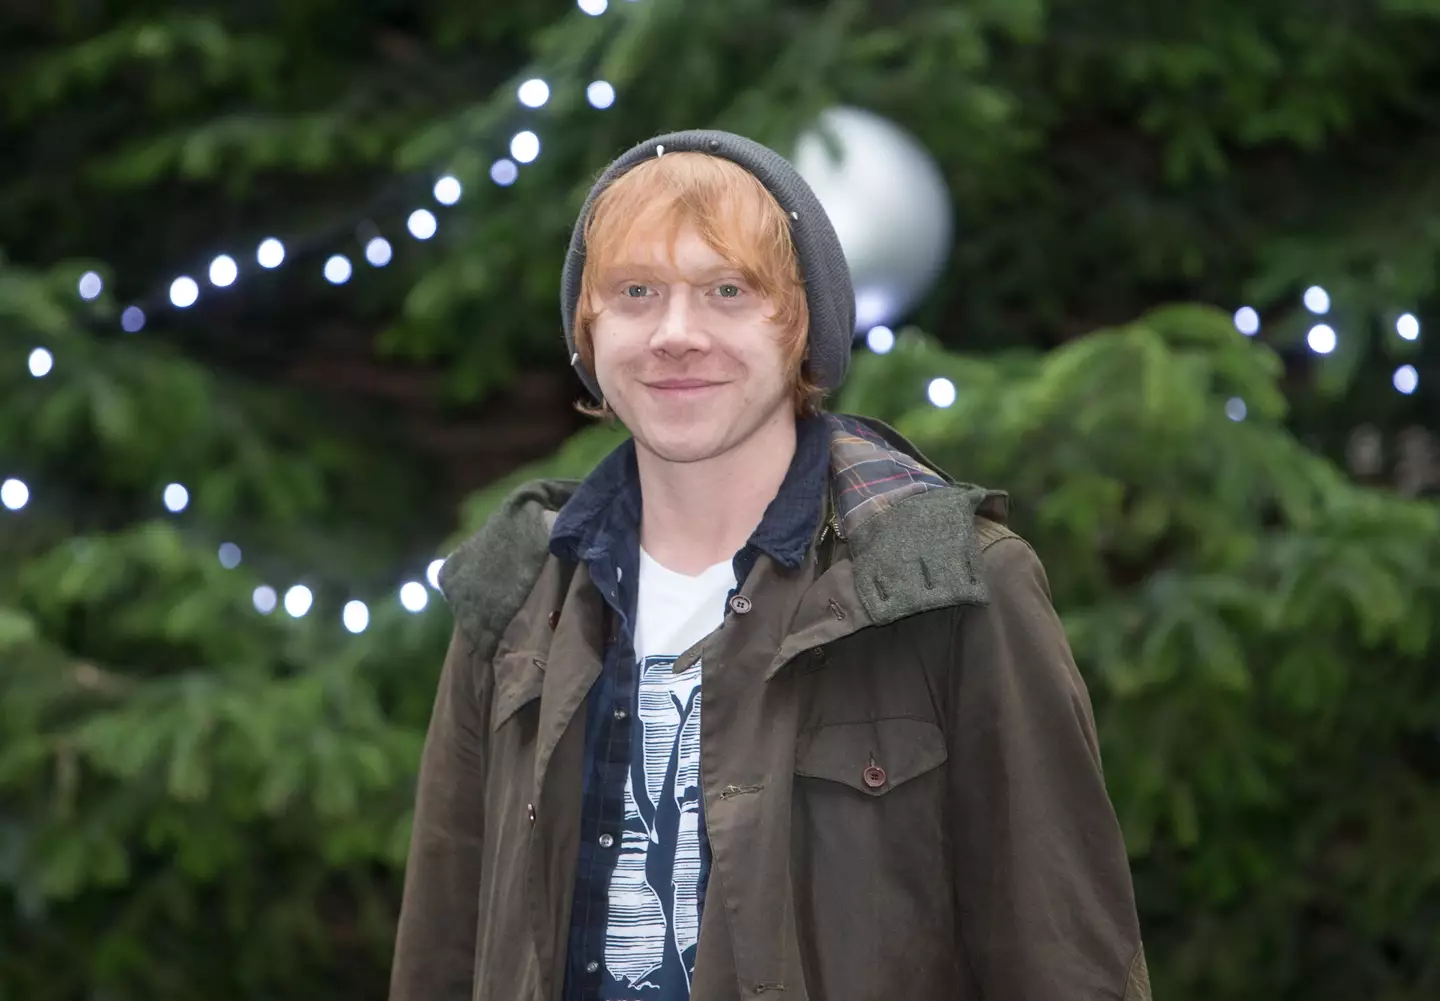 Rupert Grint wants to build eco-friendly affordable housing, but locals have some concerns.